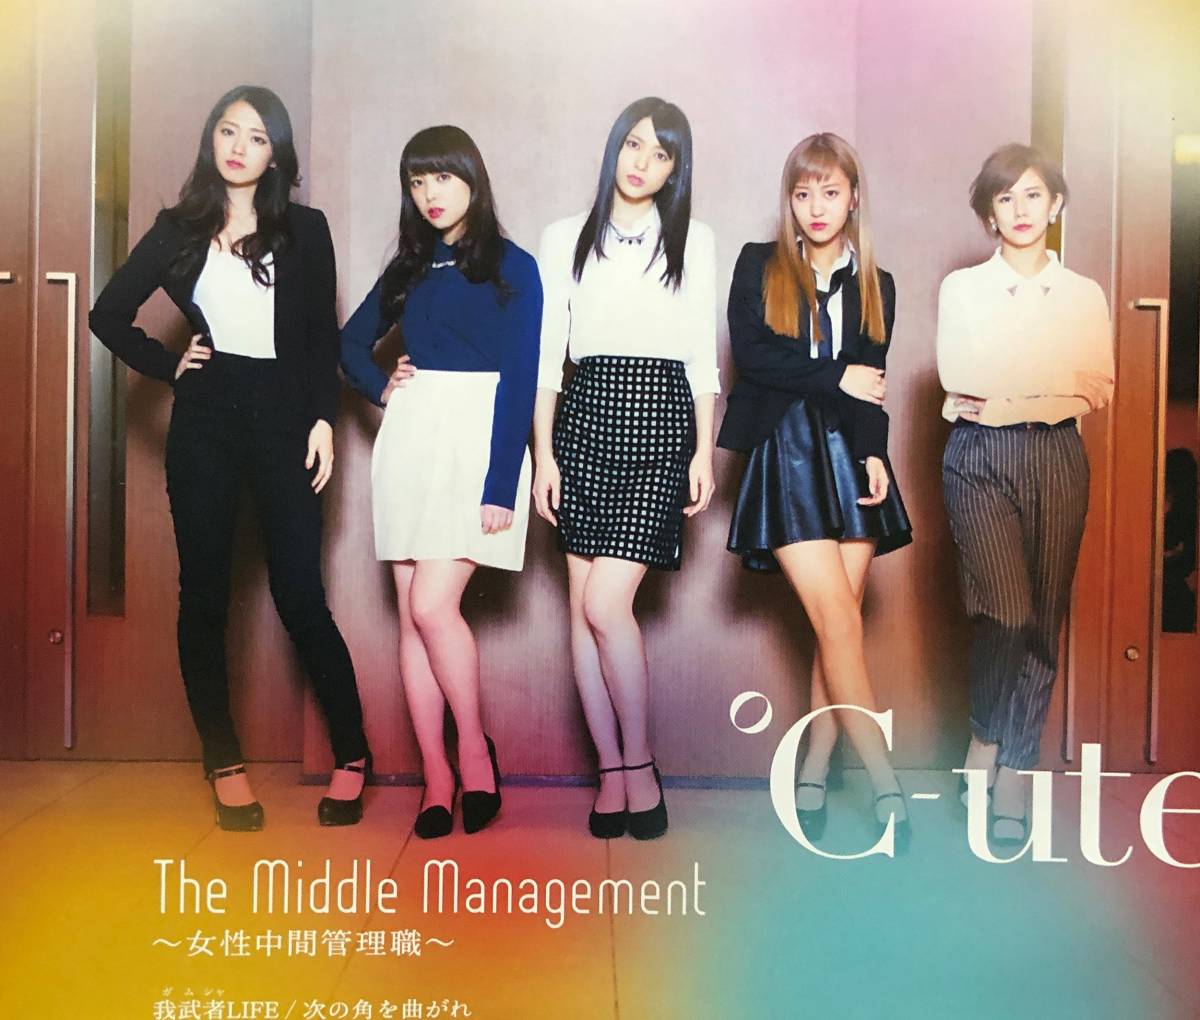 The Middle Management ～女性中間管理職～／我武者LIFE／次の角を曲がれ(A) ℃-ute★送料無料★EPCE-7105